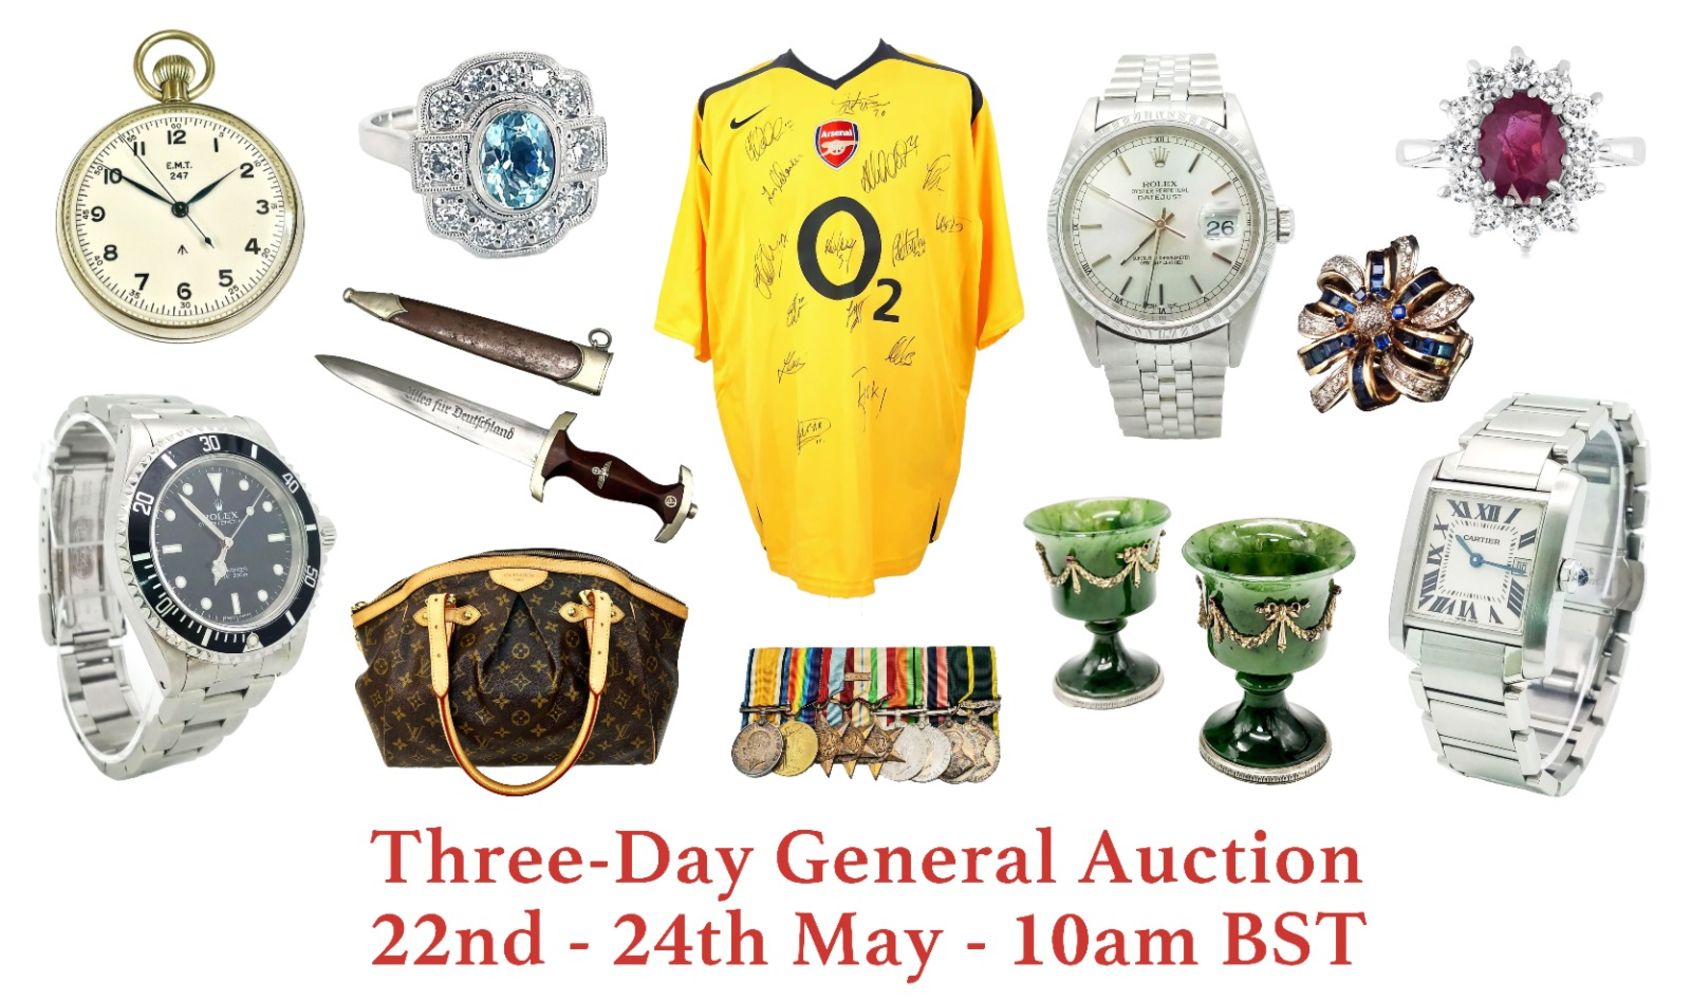 Three-Day General Auction (Jewellery, Watches, Militaria, Antique and Collectables)